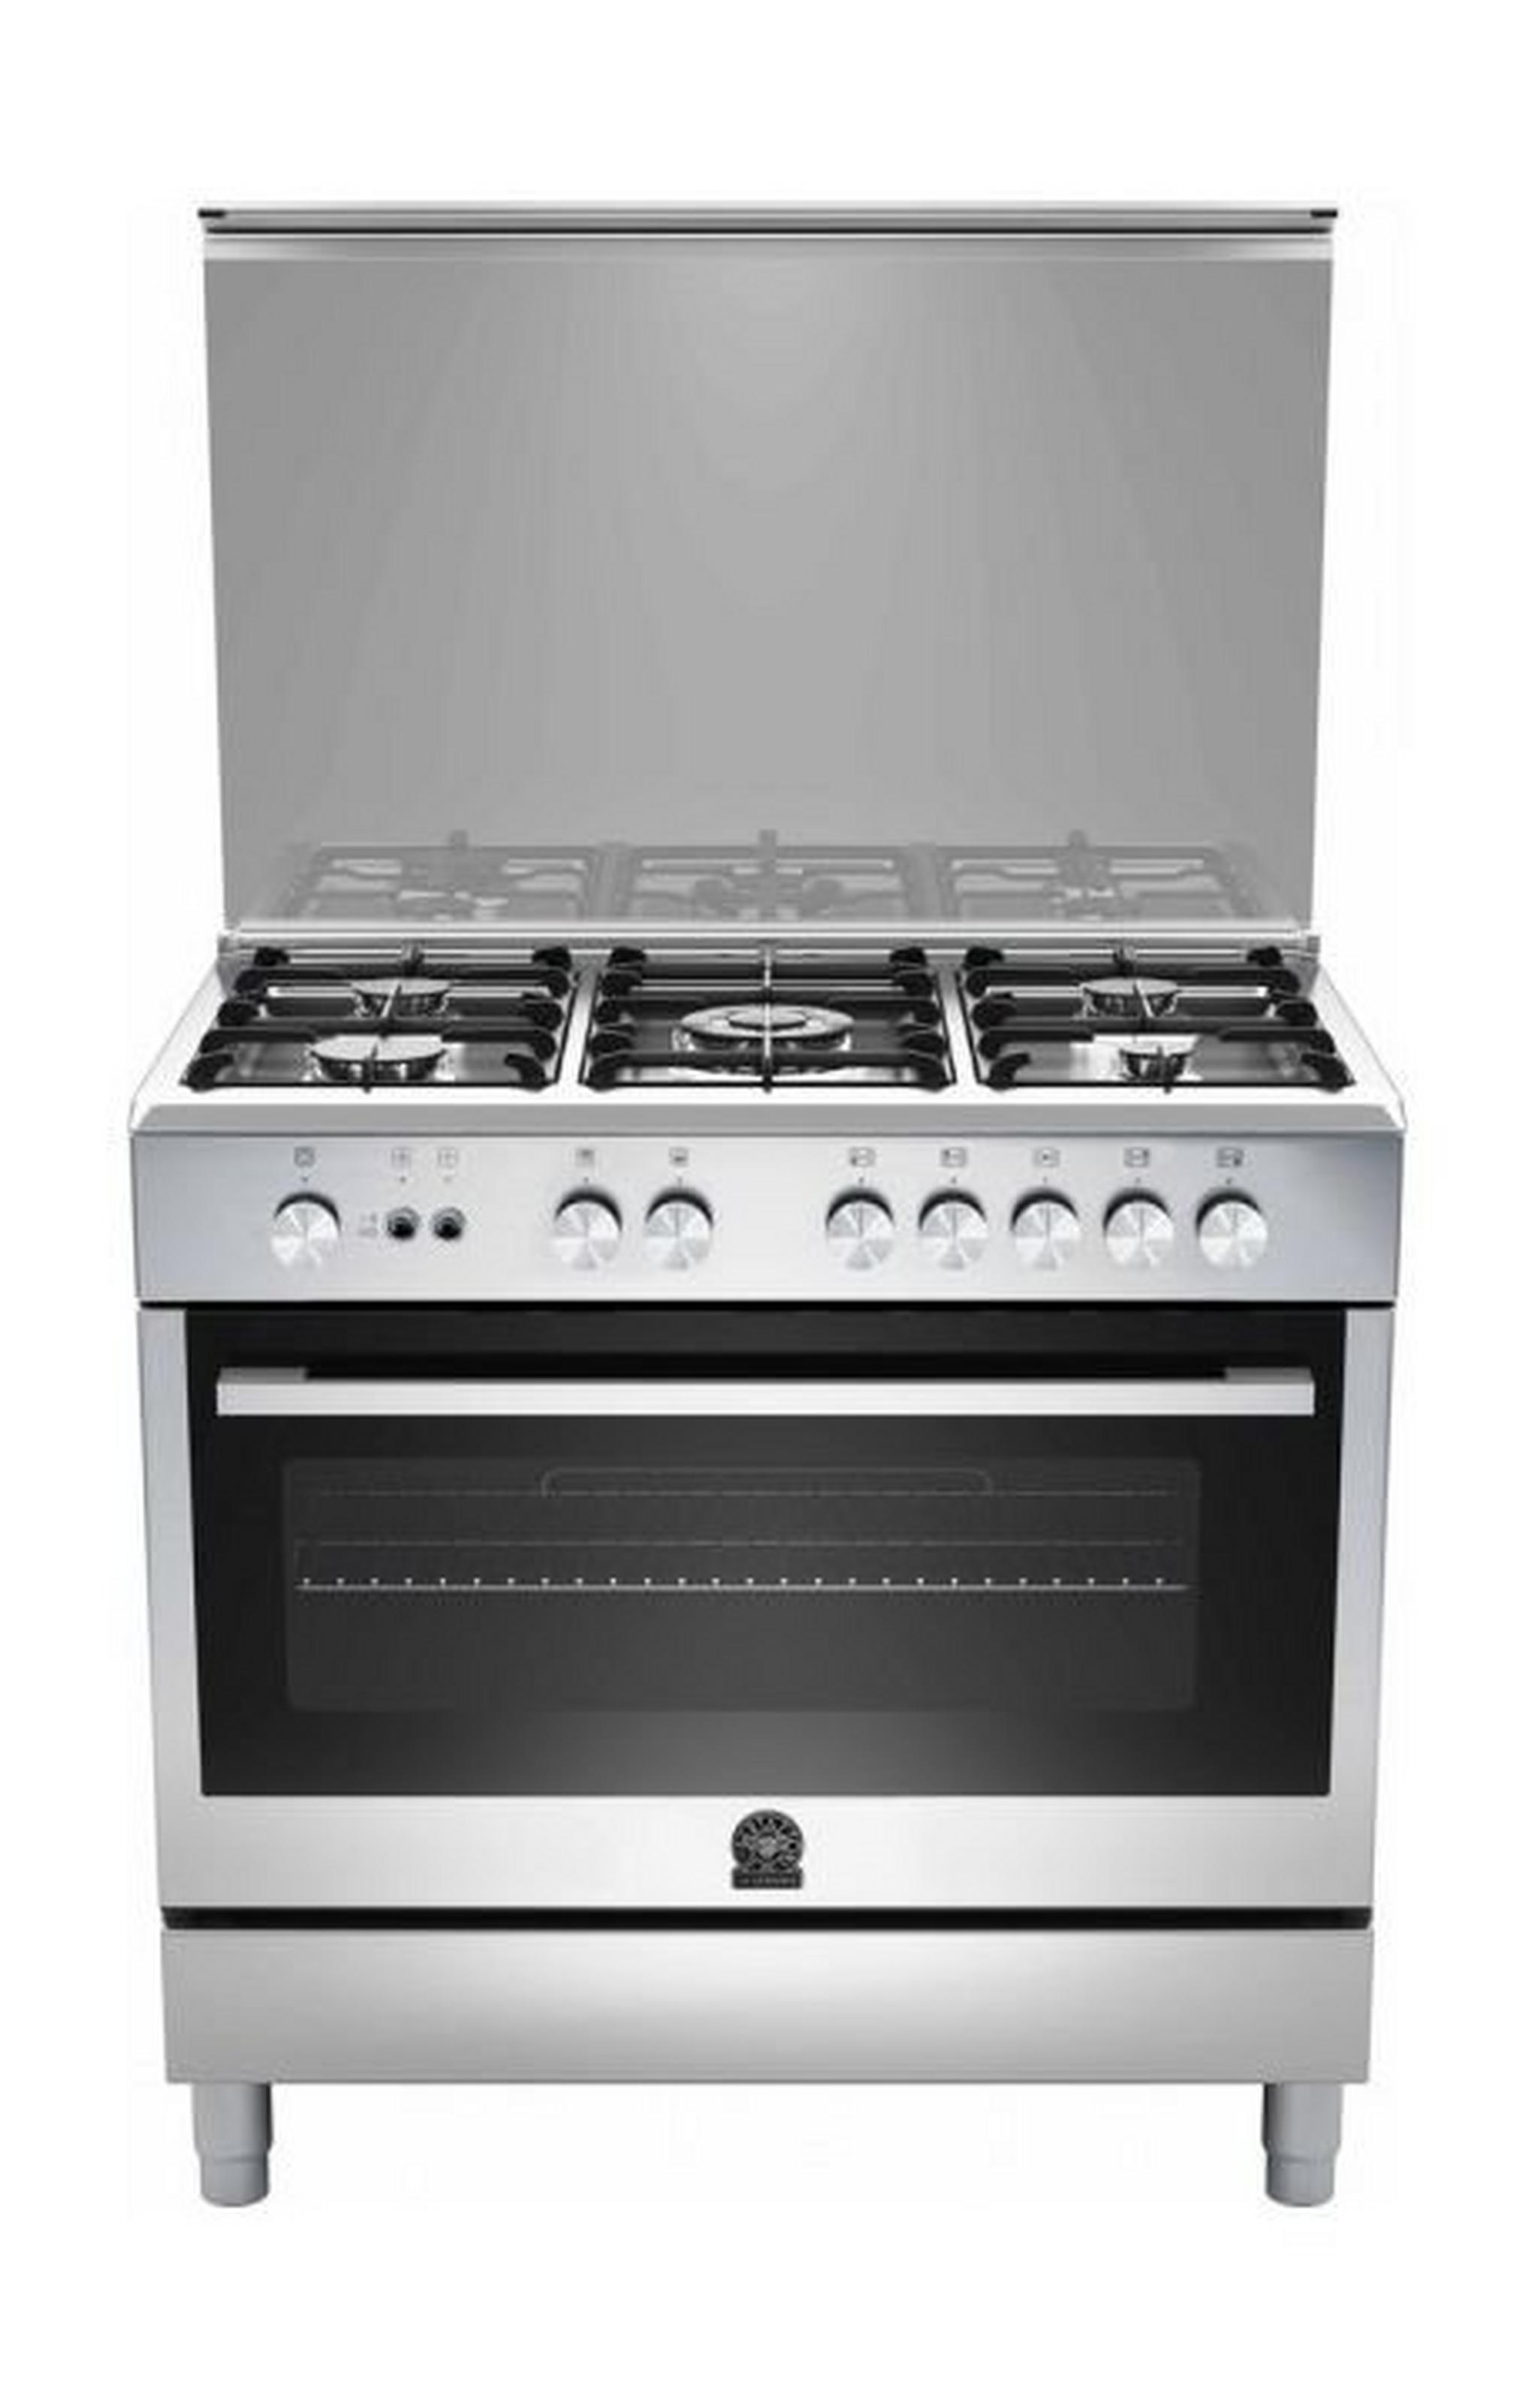 Lagermania 90x60cm 5-burner Gas Cooker and Oven + Lagermania 90 x 60 Cooker Hood Stainless Steel